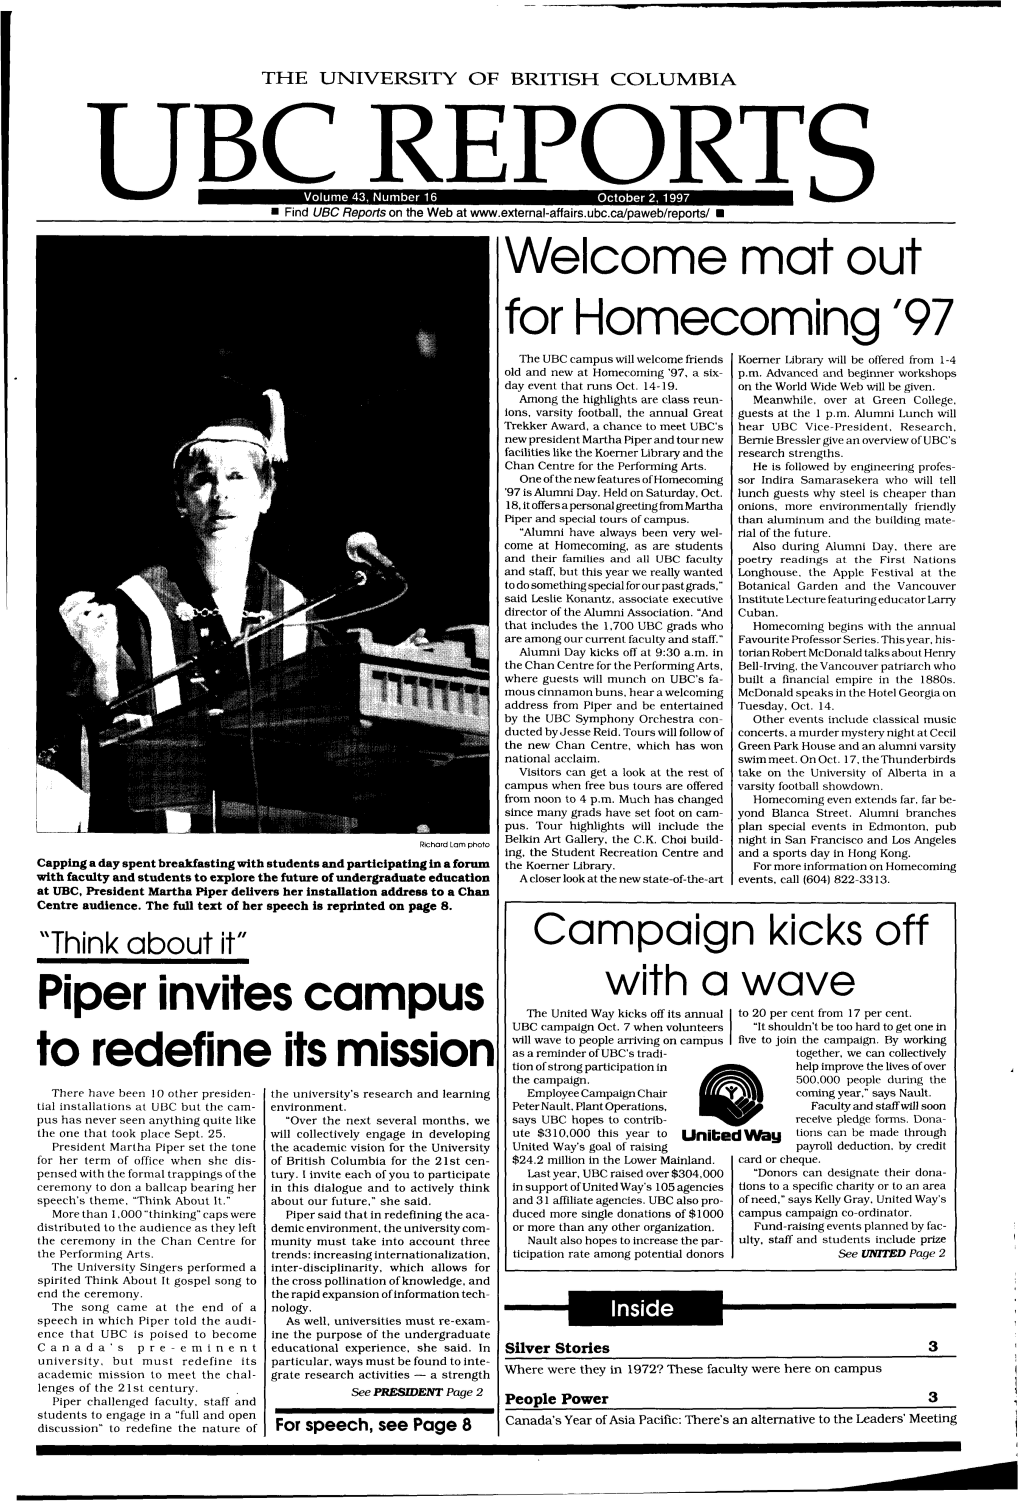 Mat out for Homecoming '97 the UBC Campus Will Welcome Friends Koemer Library Will Be Offered from 1-4 Old and New at Homecoming '97, a Six- P.M